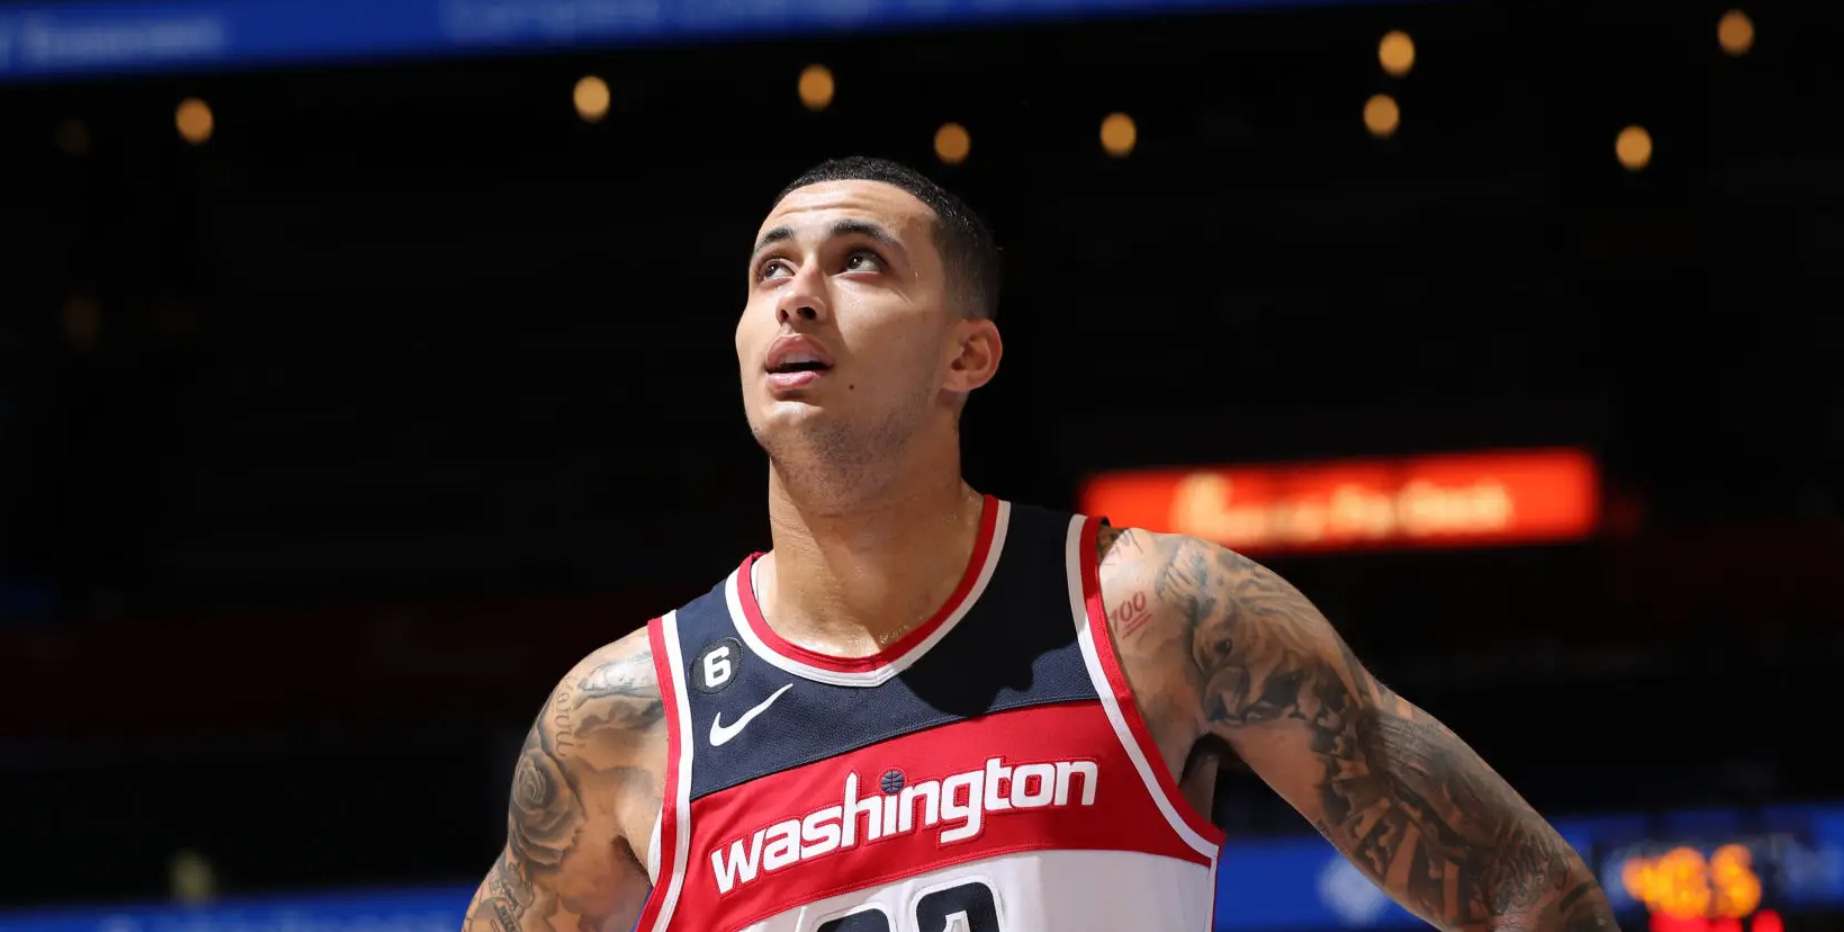 NBA Rumors: Best player the Lakers could target in Kyle Kuzma trade